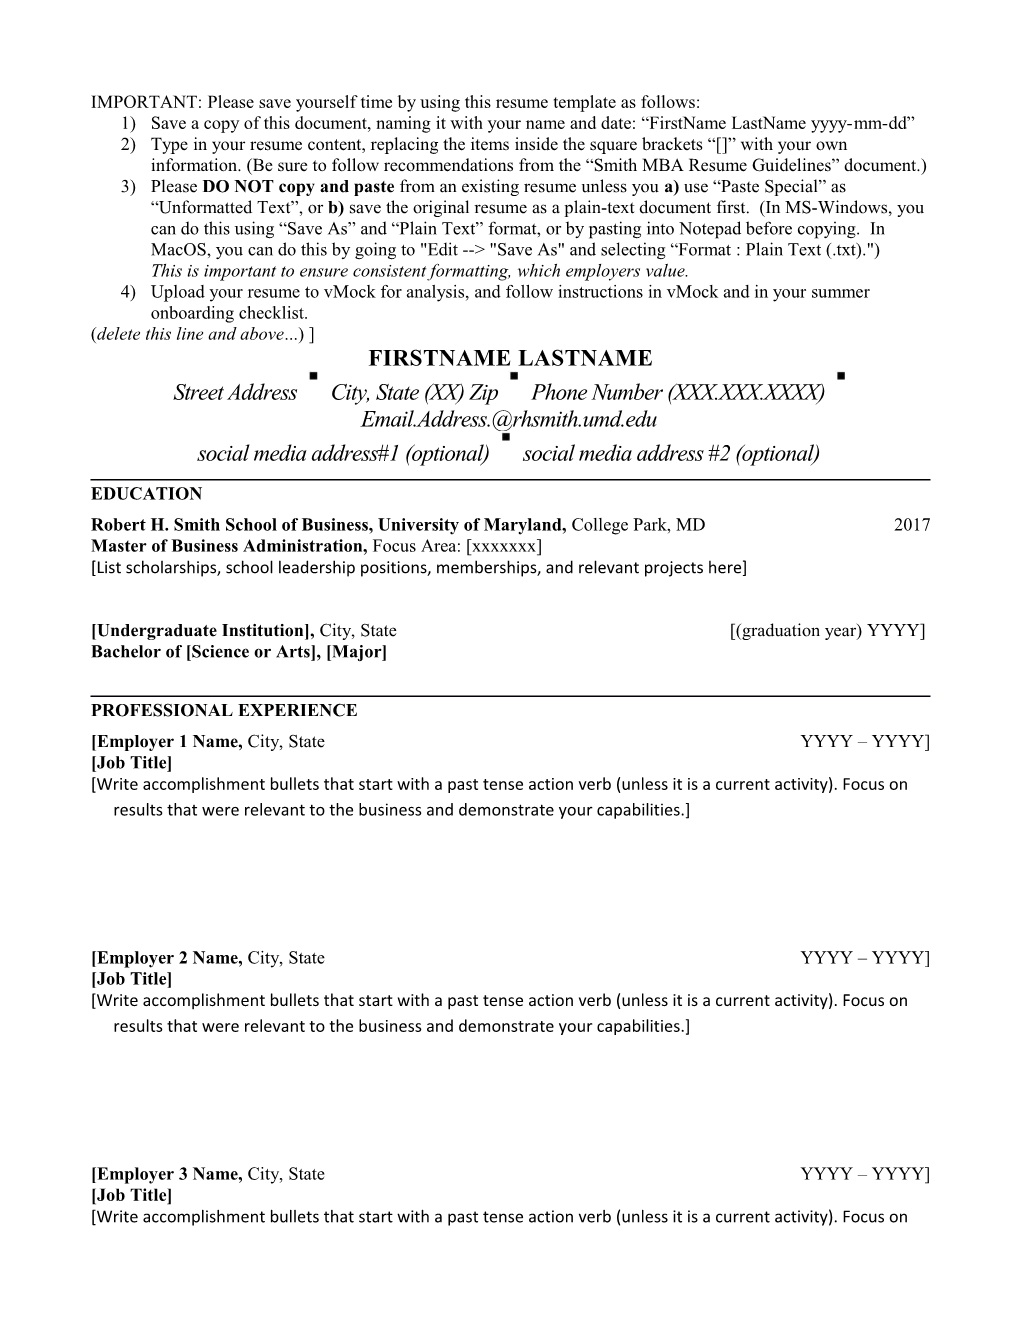 IMPORTANT: Please Save Yourself Time by Using This Resume Template As Follows